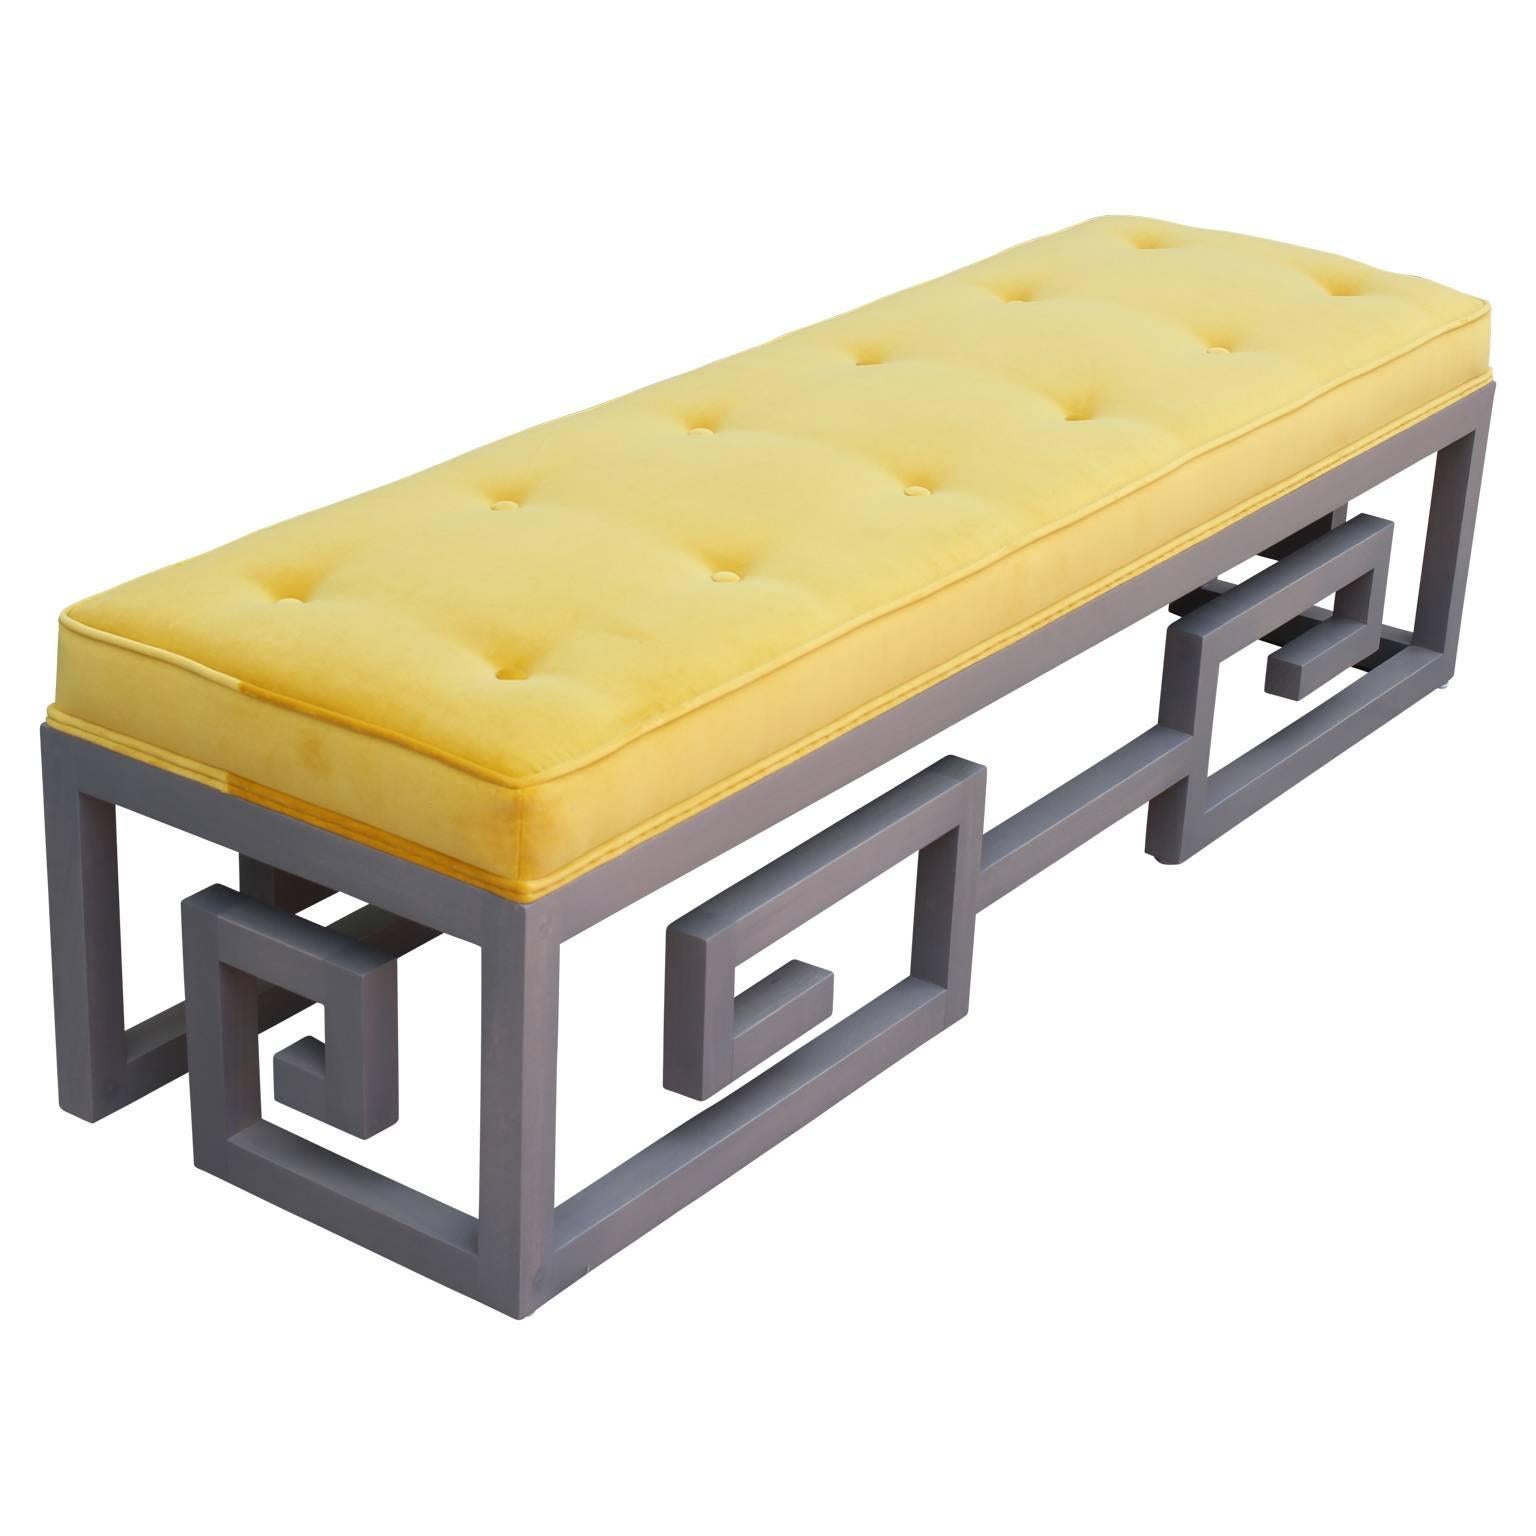 Unique Greek key bench custom-made in gray and yellow velvet in the style of Baker Furniture Company or Kittinger. We also have another one available in a purple velvet. Inquire for COM.